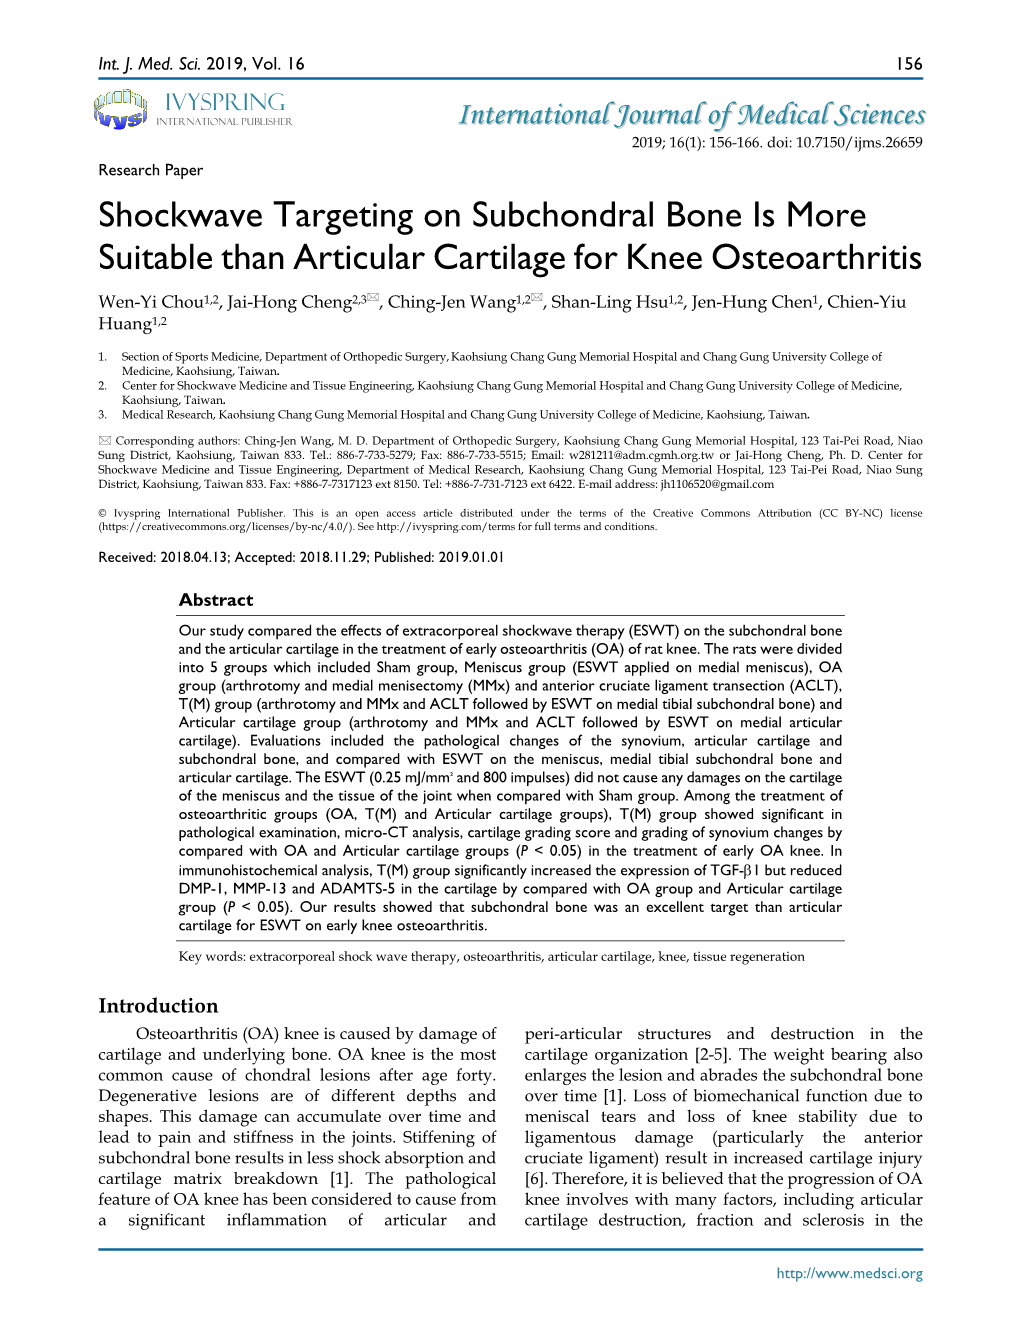 Shockwave Targeting on Subchondral Bone Is More Suitable Than